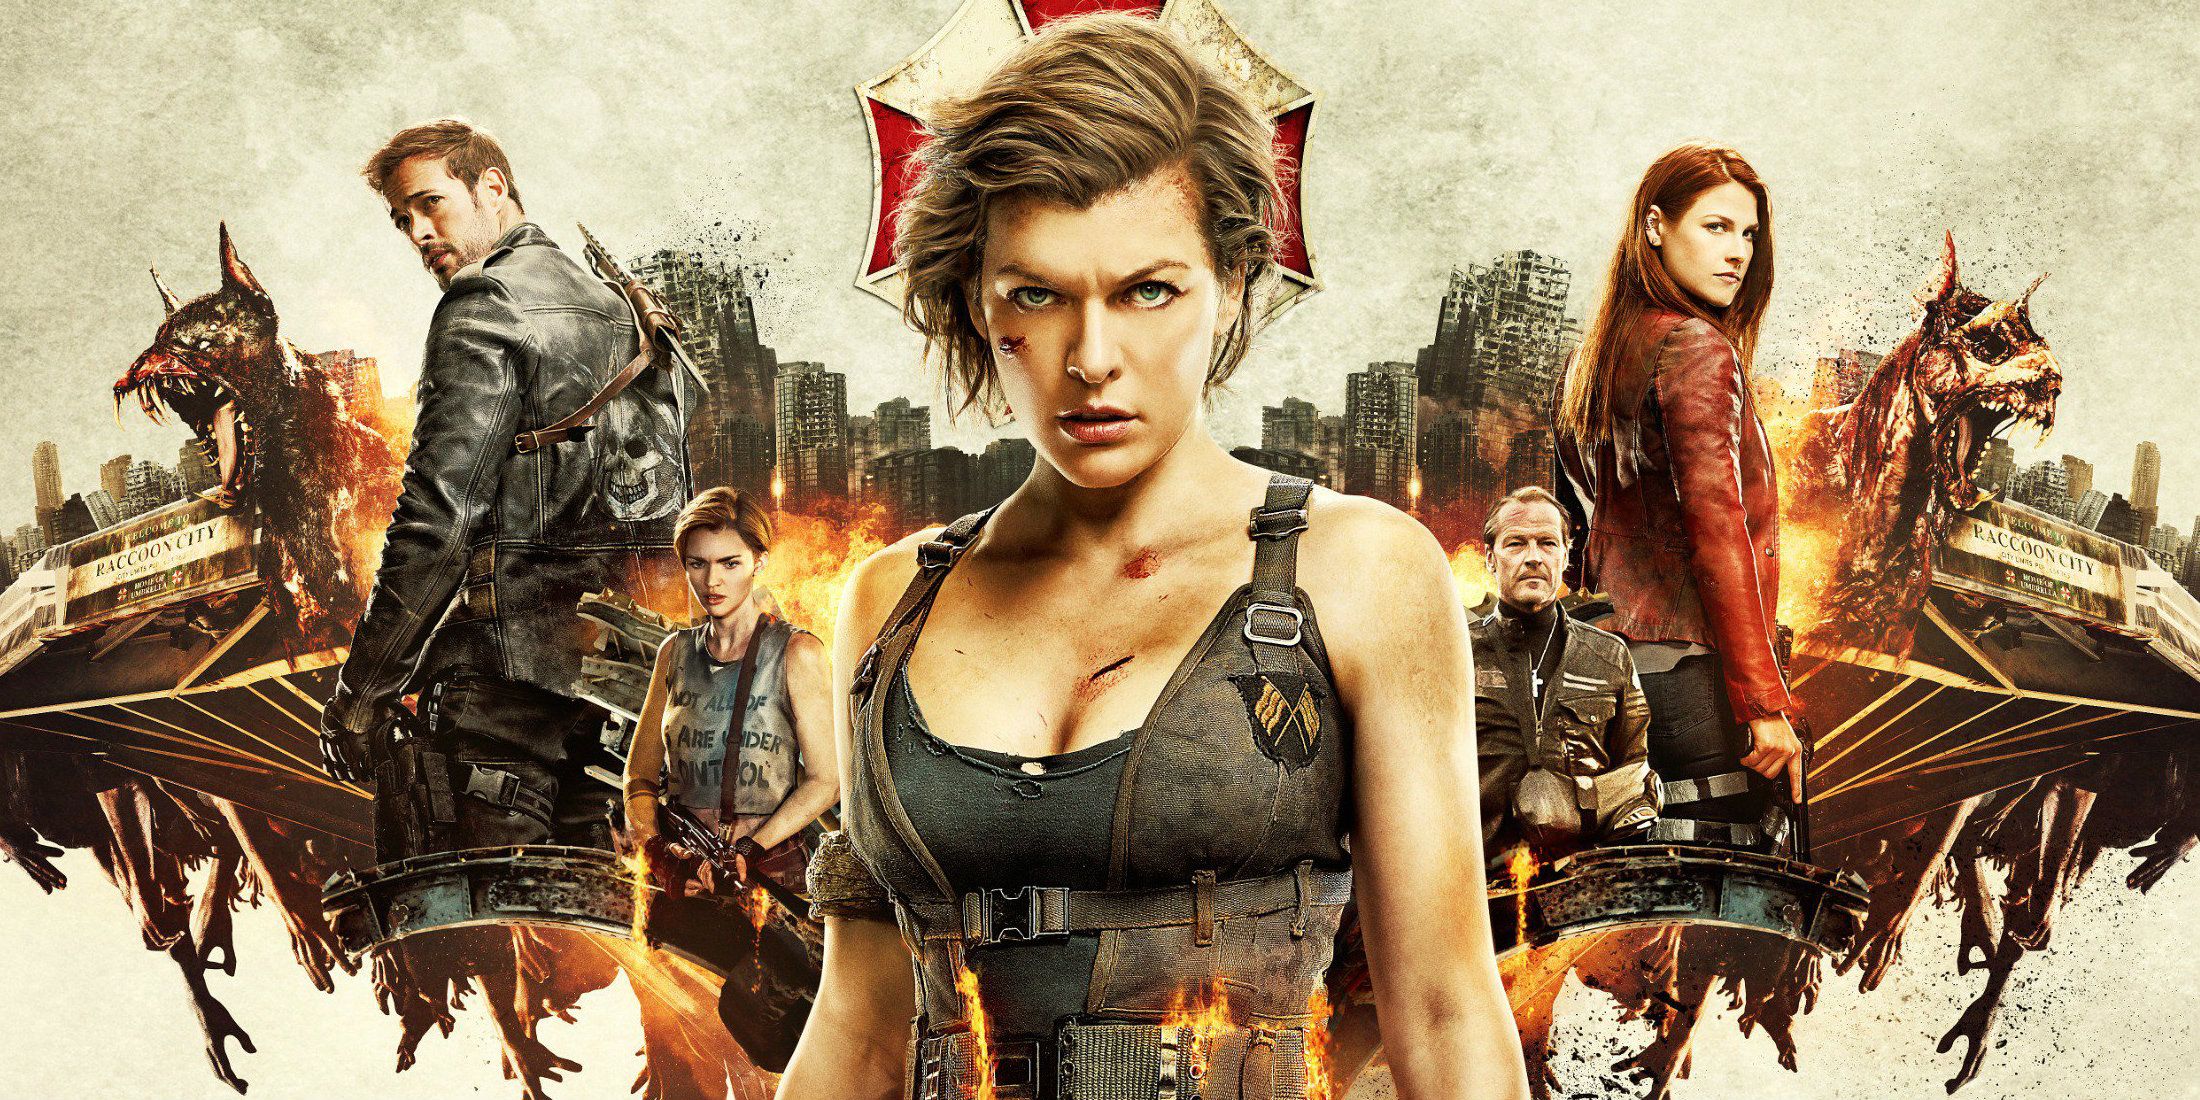 Adam Lee - Resident Evil: The Final Chapter